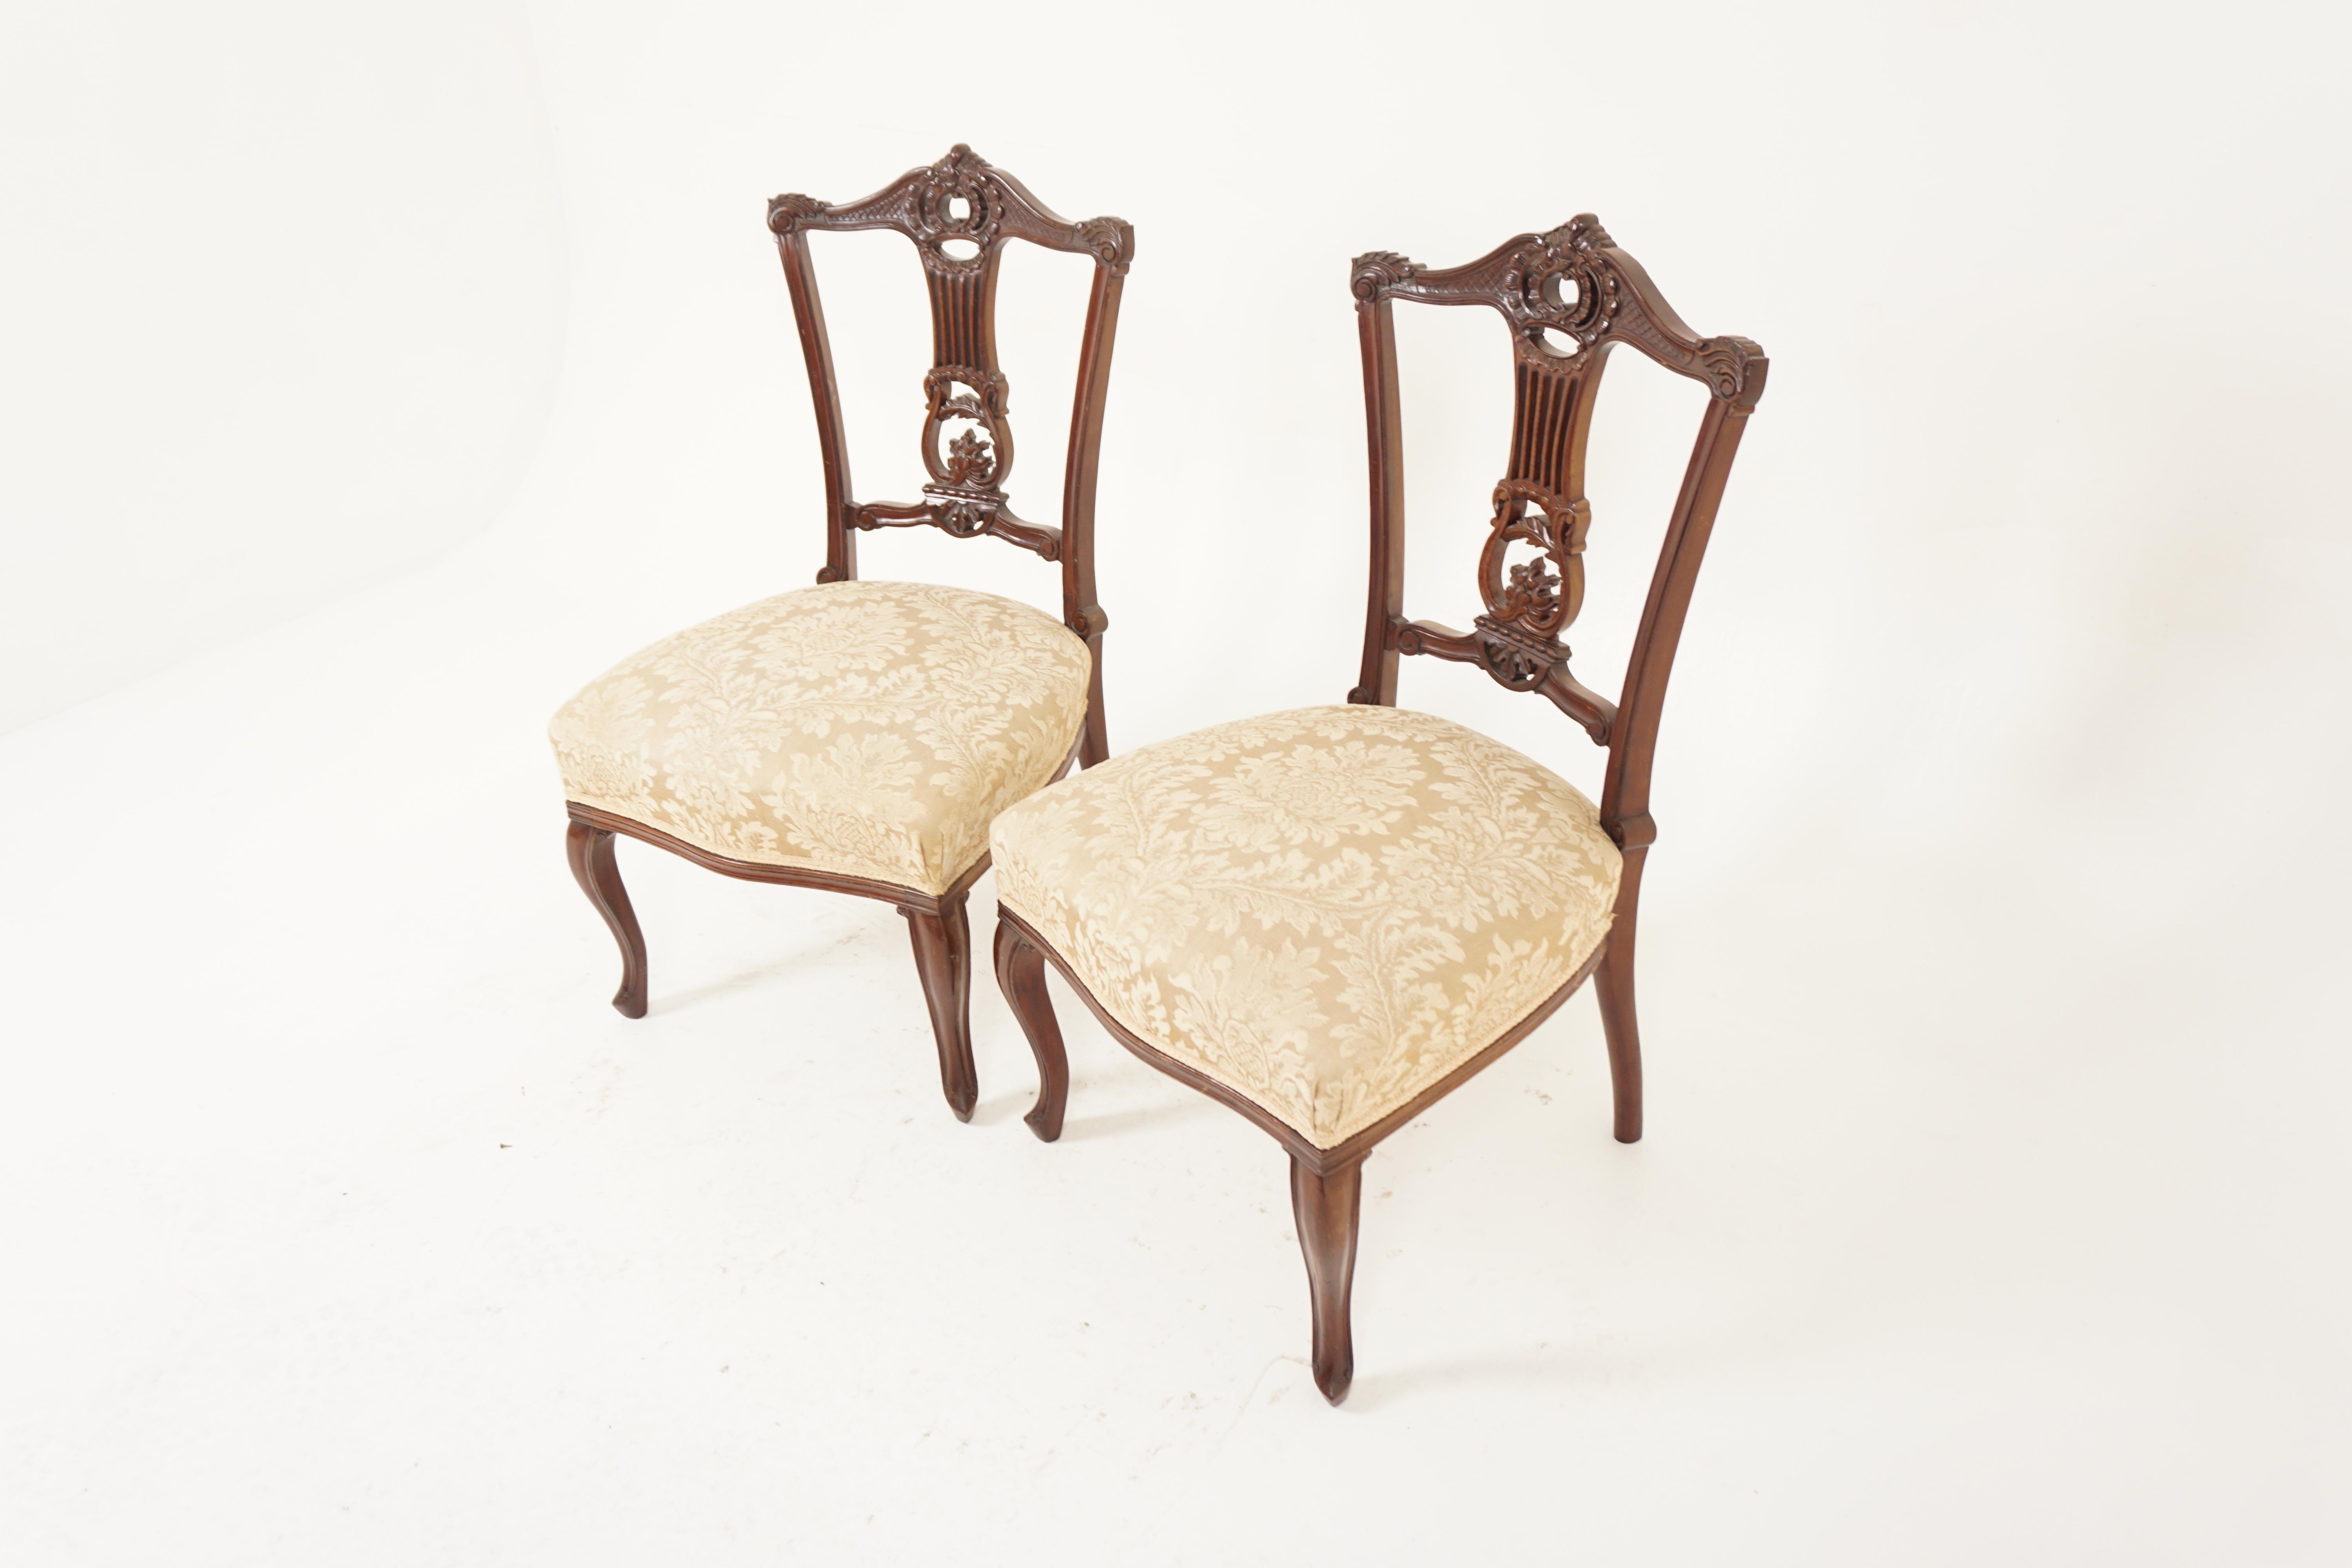 Antique Walnut Chairs, Pair of Victorian Carved Walnut Side Chairs, Hall Chairs, Antique Furniture, Scotland 1890, H1071

+ Scotland 1890
+ Walnut
+ Original Finish
+ Having pretty ornate pierced shaped backs
+ With brocade covered upholstered